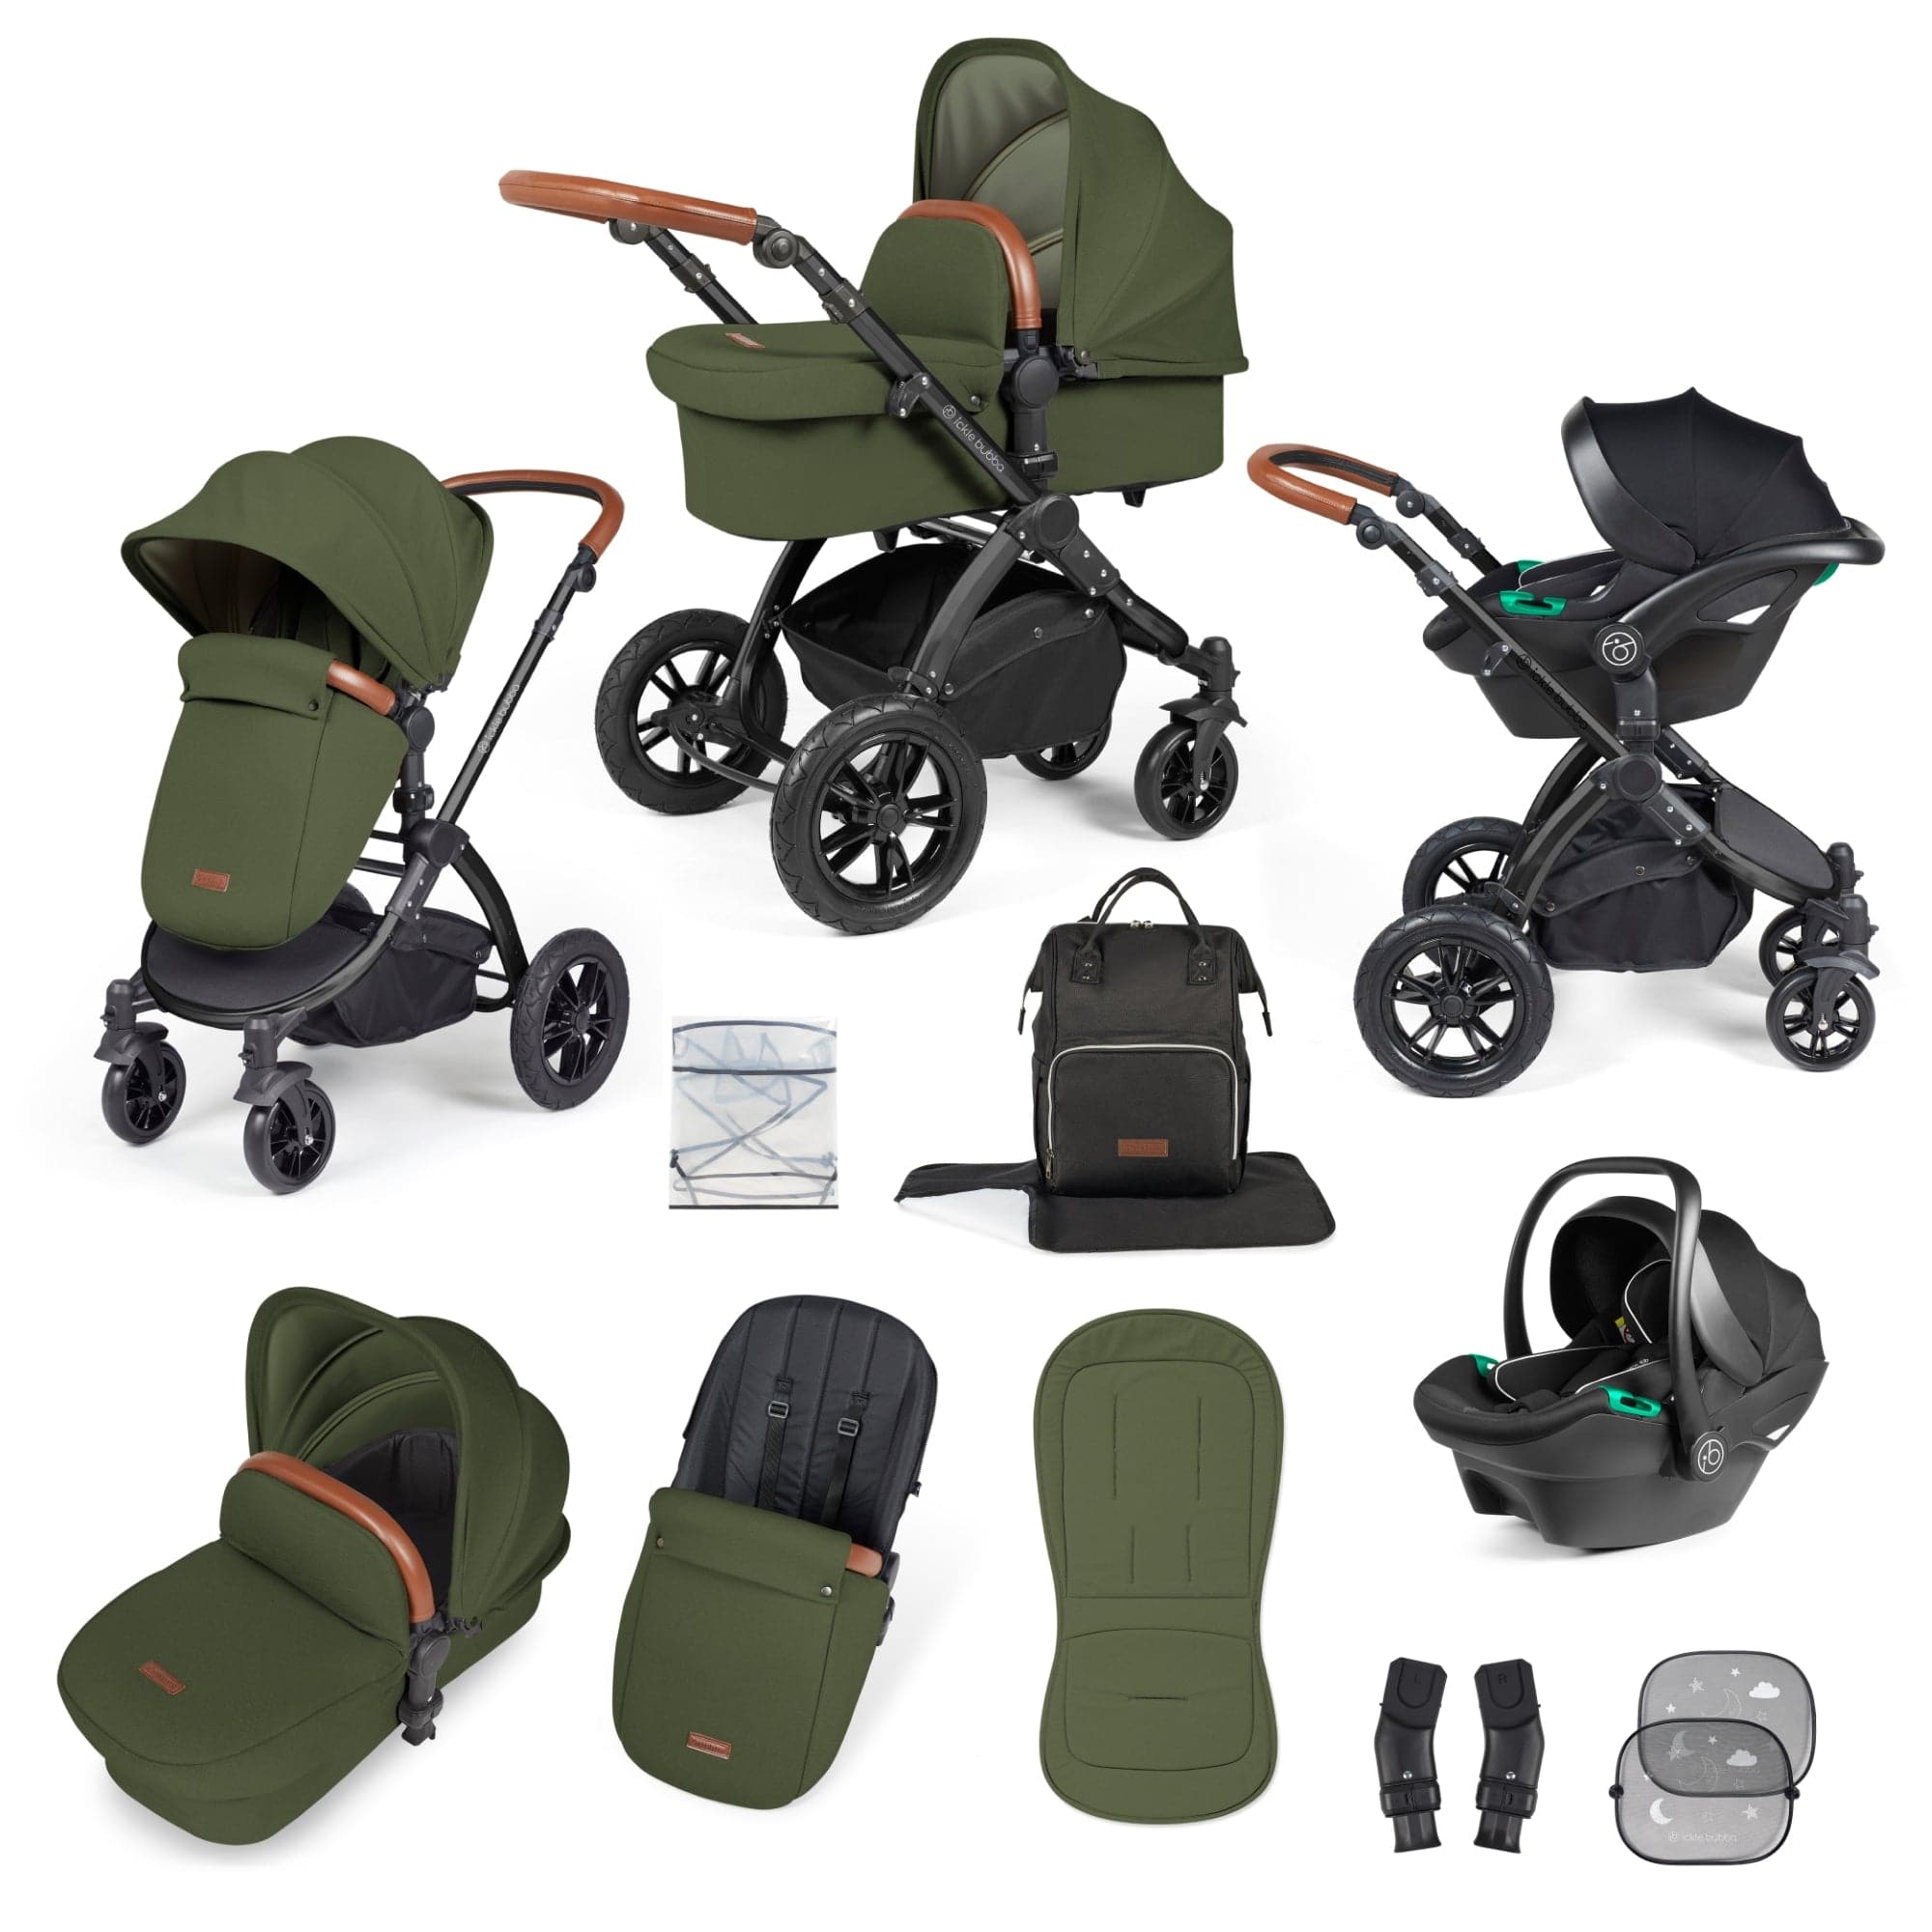 Ickle Bubba Stomp Luxe All-In-One I-Size Travel System - Black / Woodland / Tan   